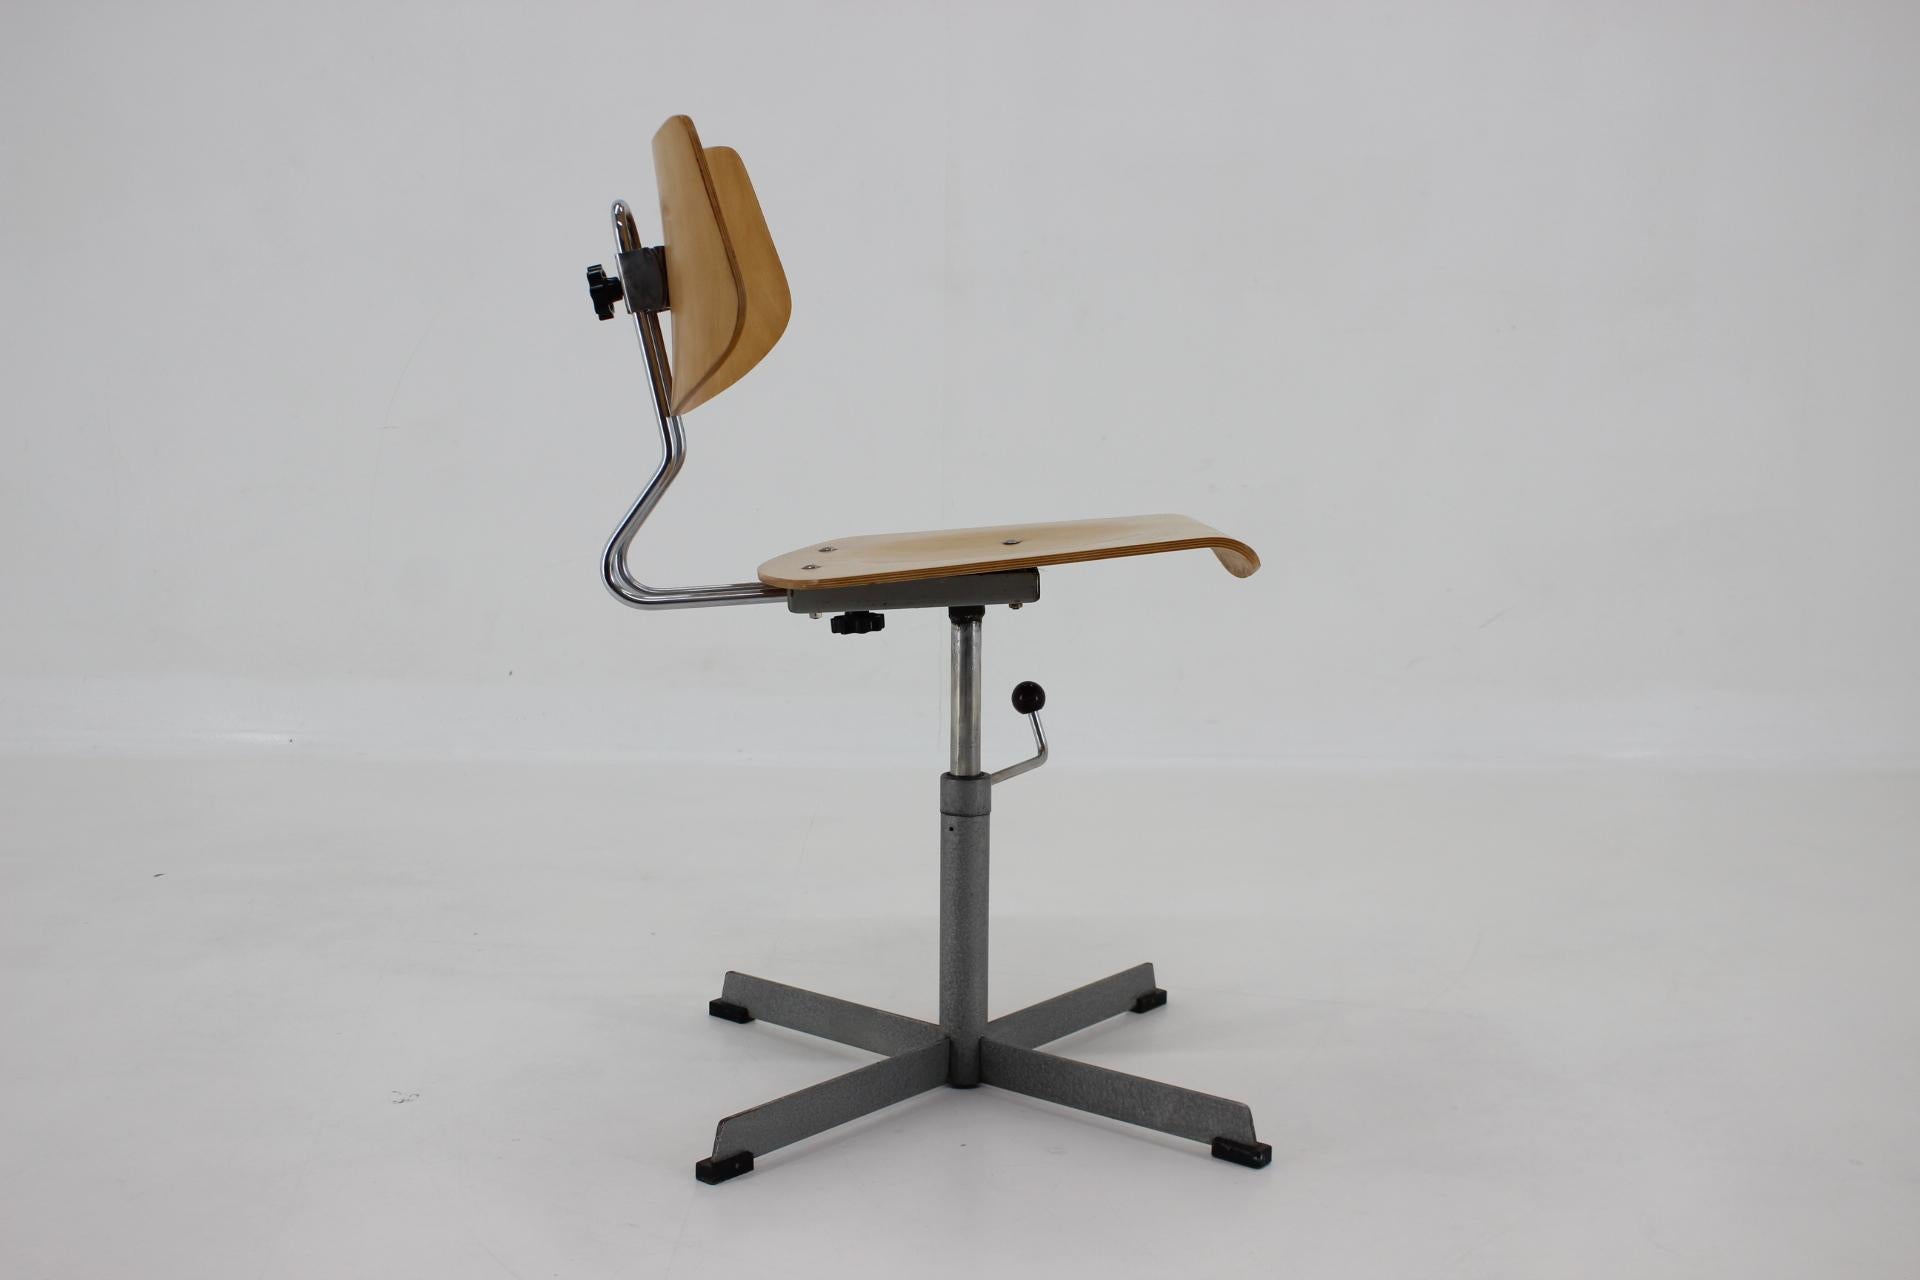 - wooden parts have been refurbished 
- swivel base in good condition 
- height of seat from 44-58
- height of chair from 74-87.